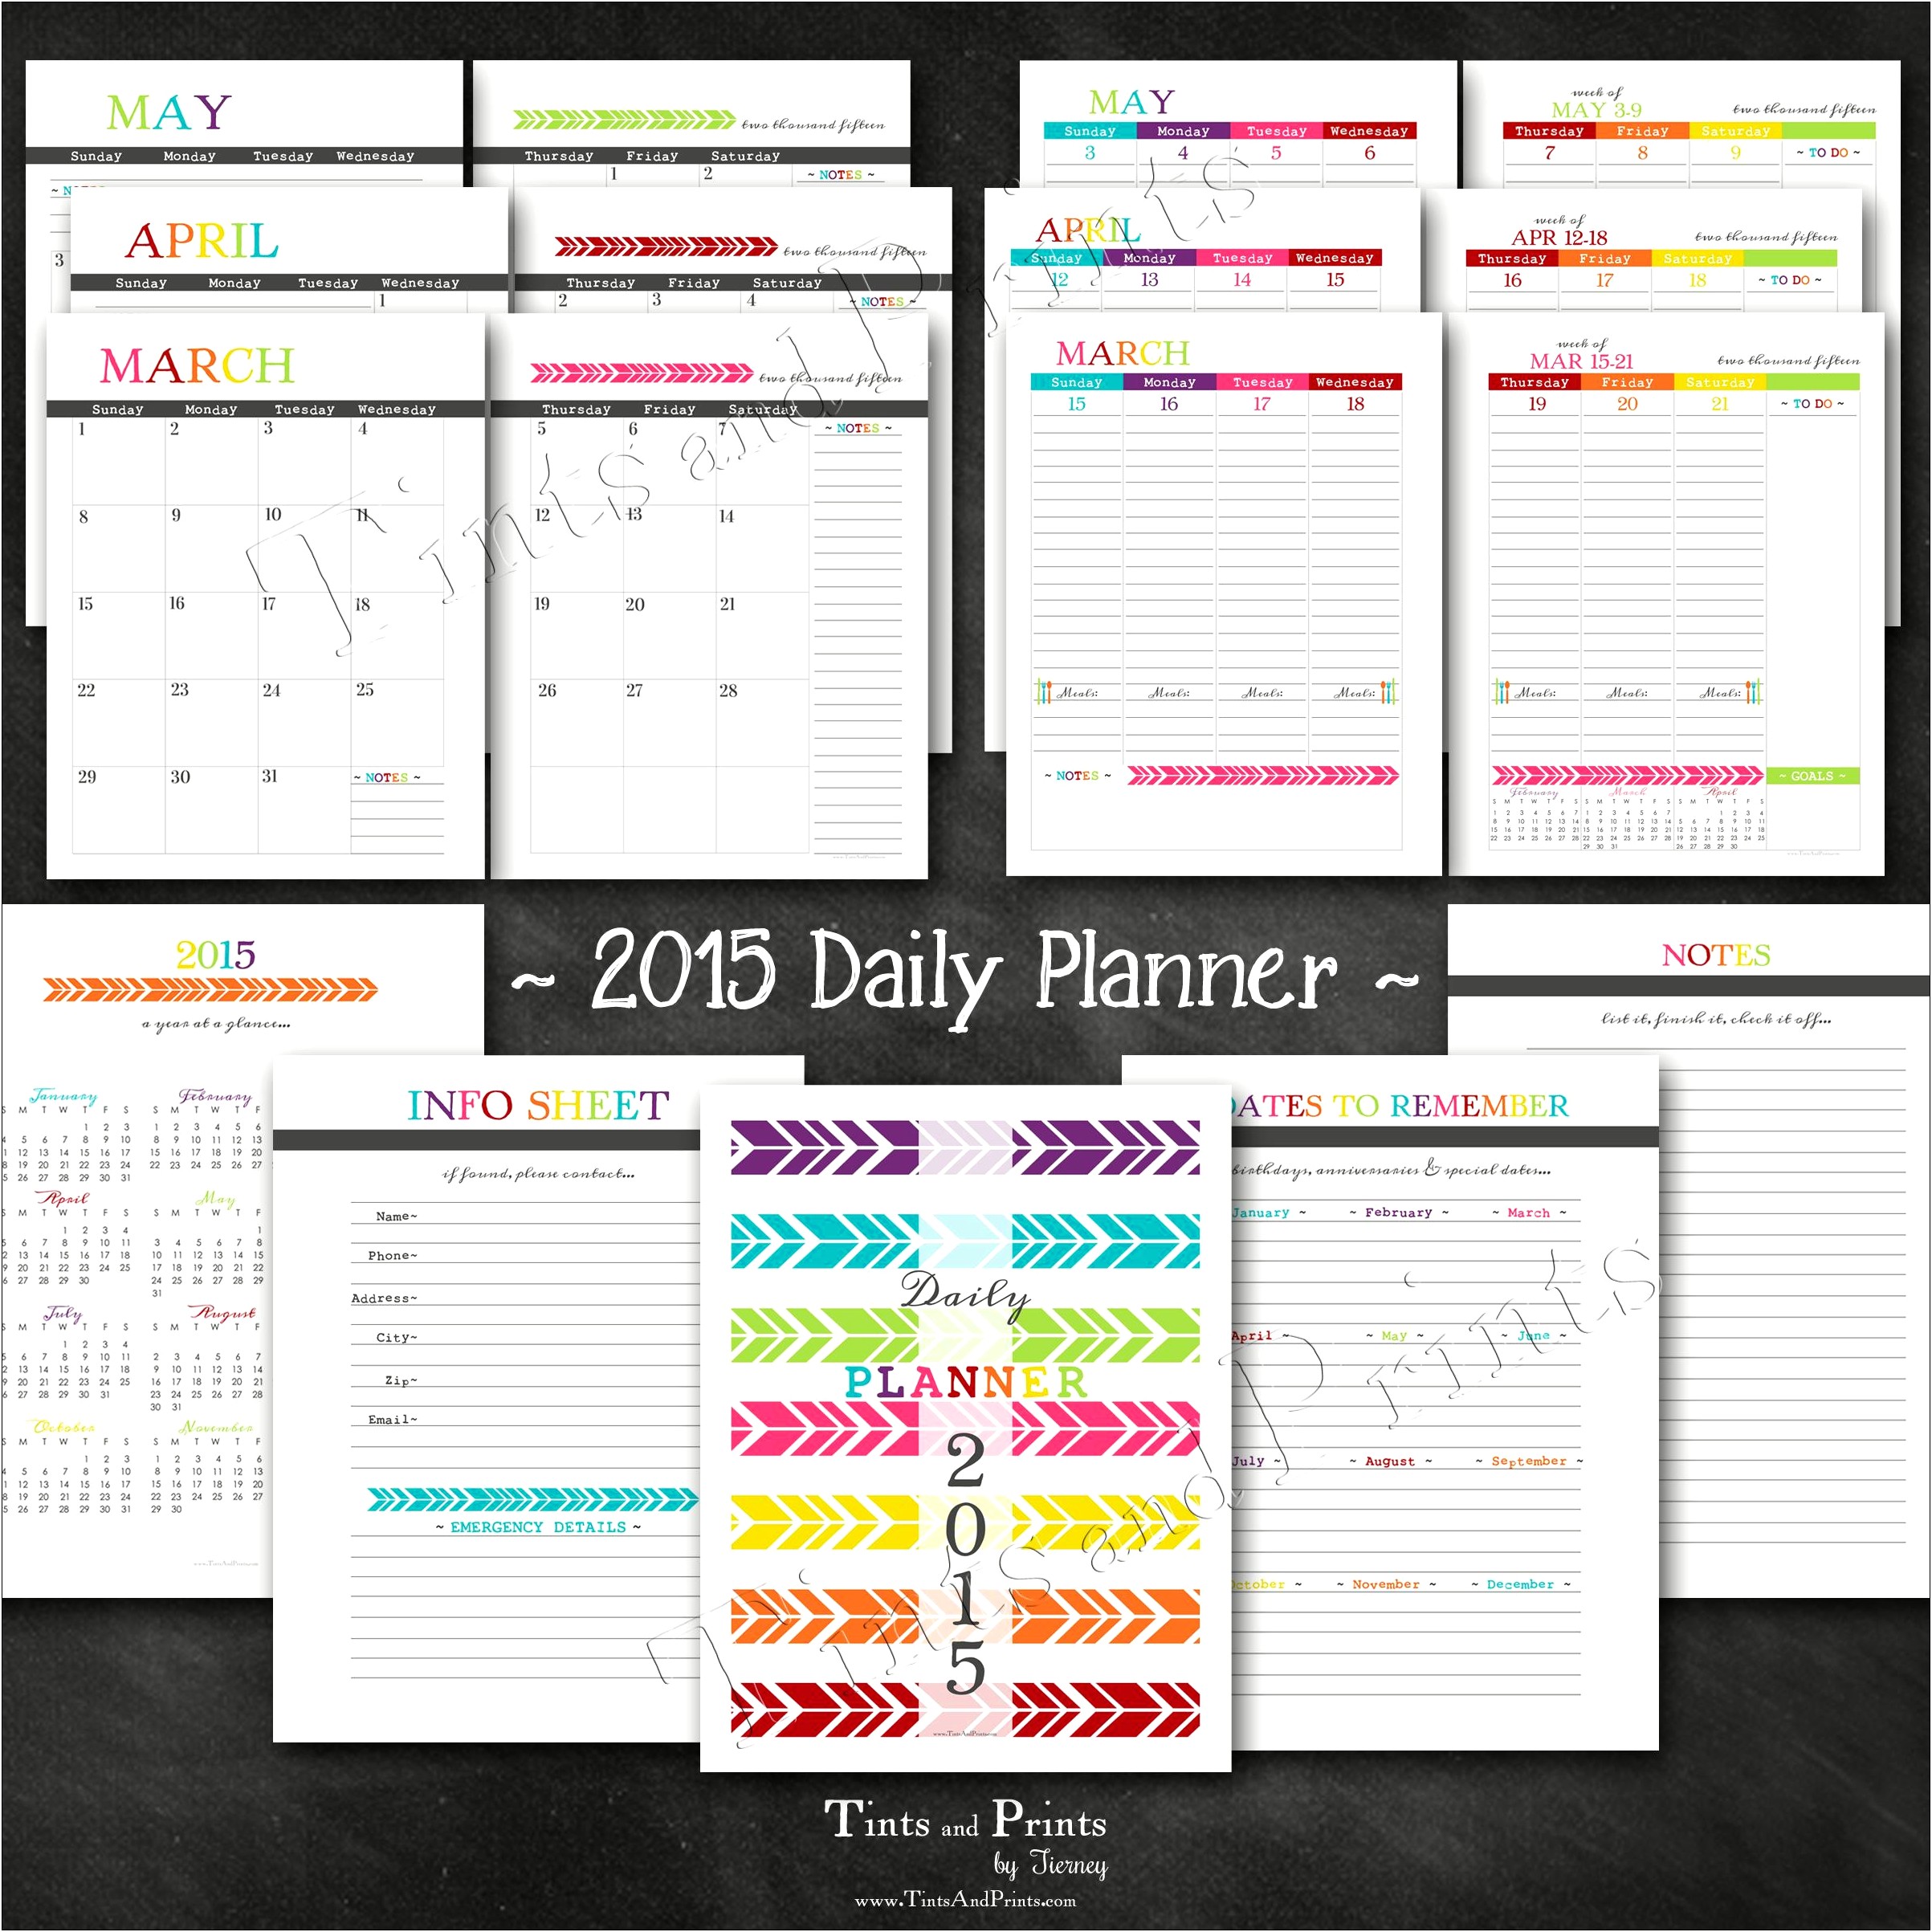 Free Printable Daily Planner Template 2015